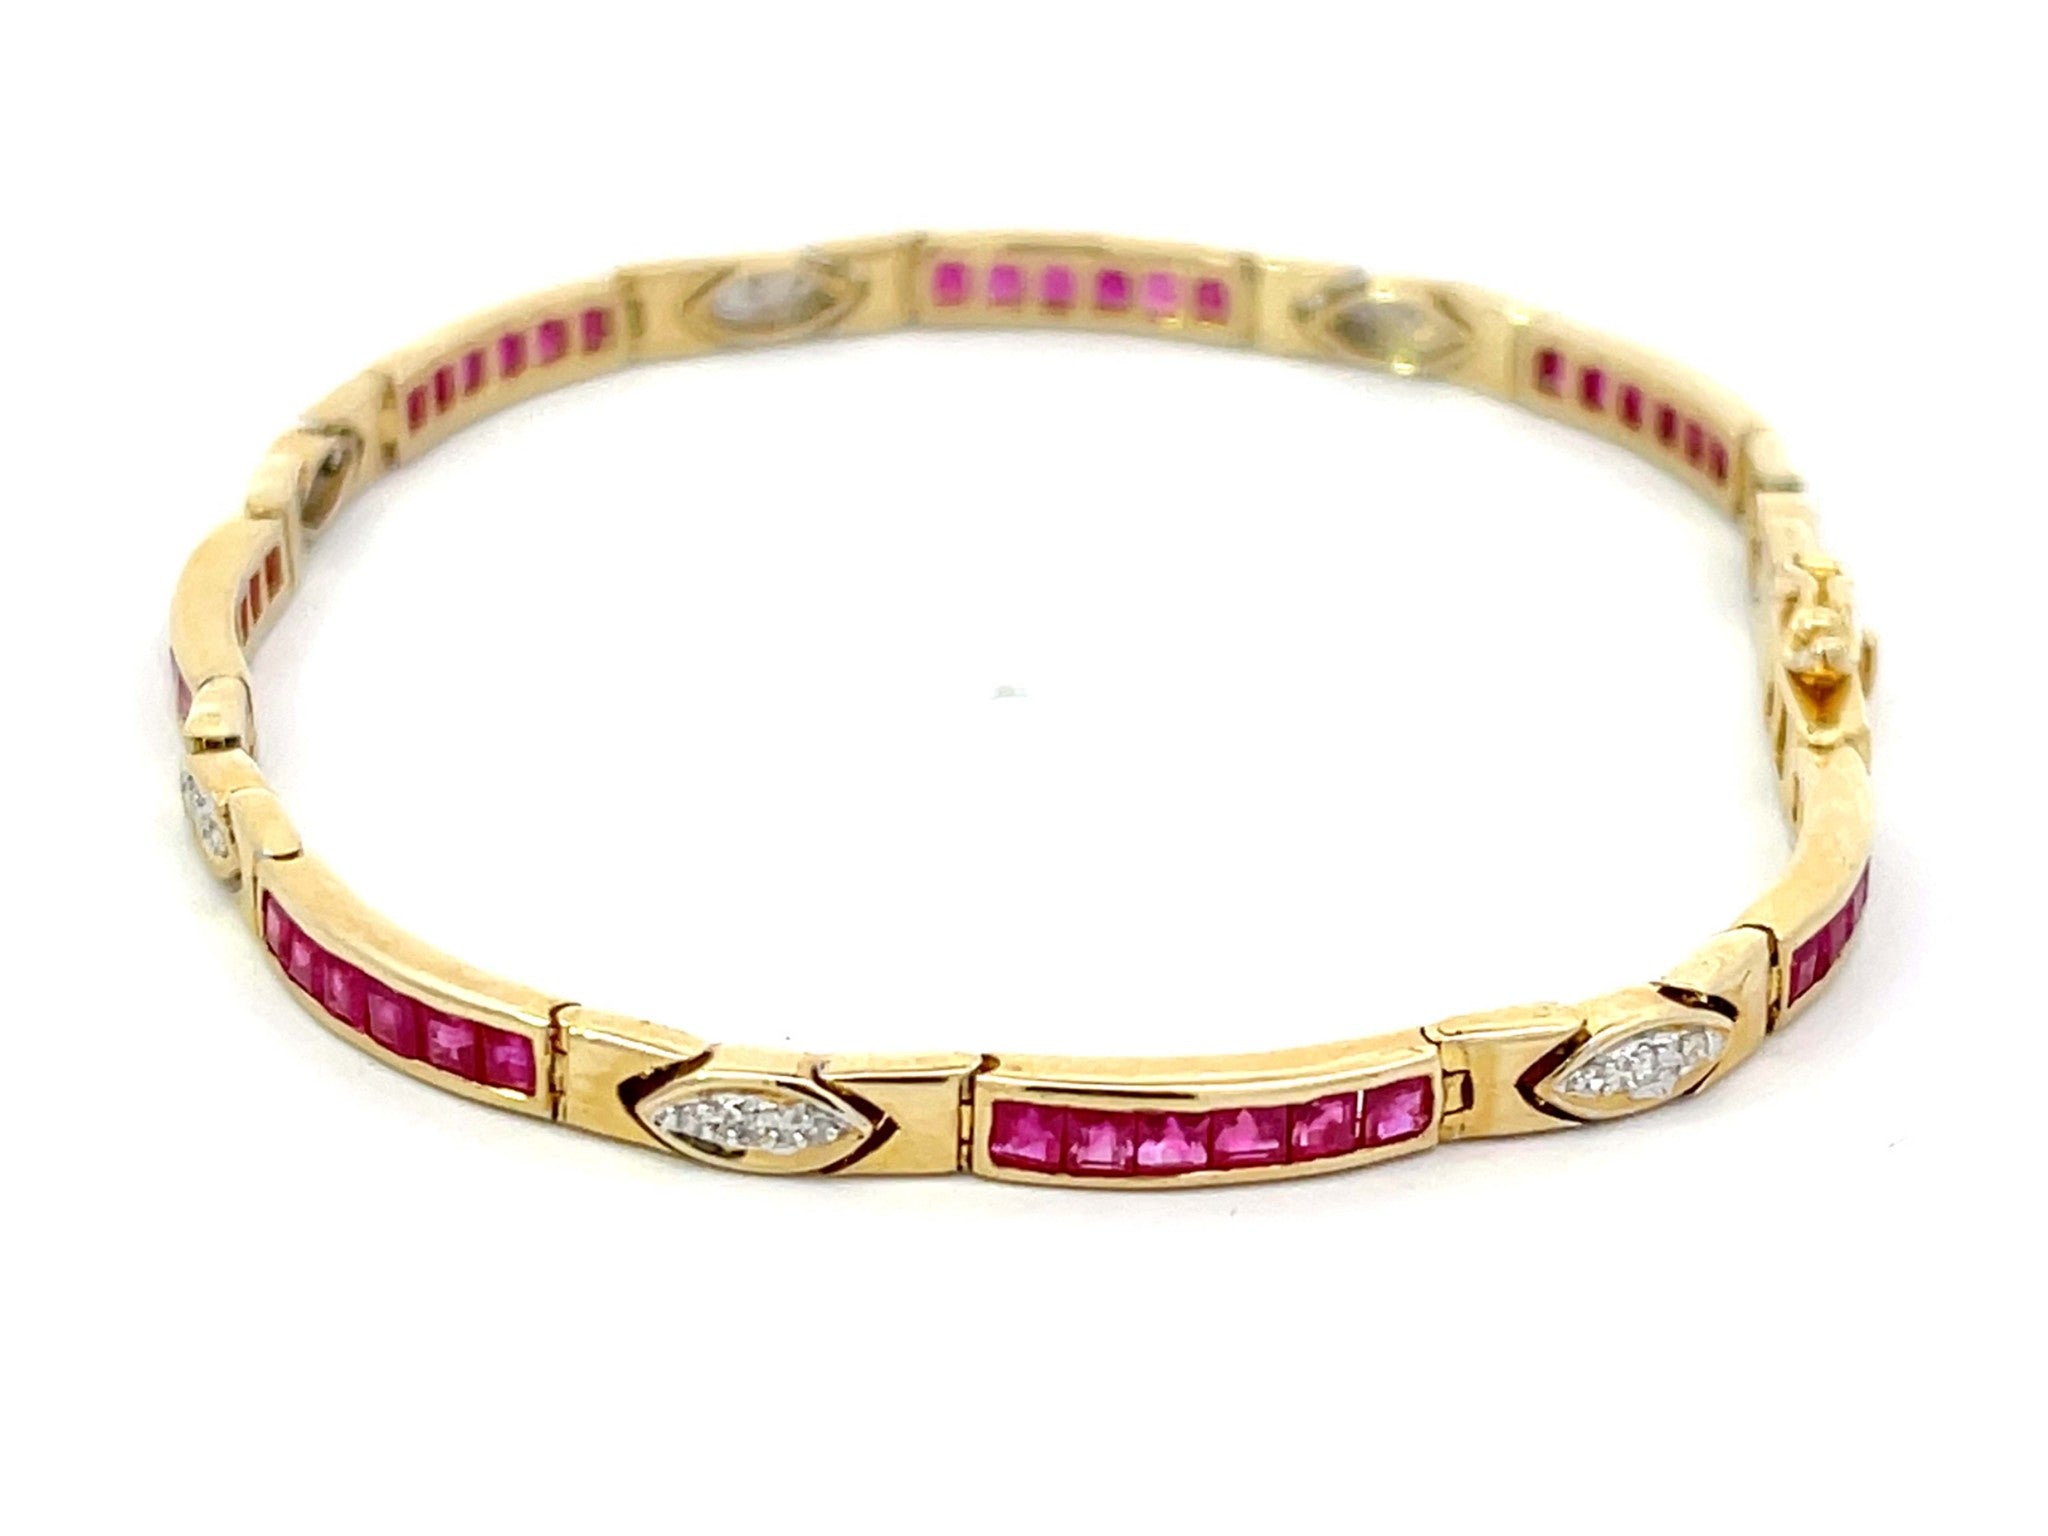 Princess Cut Red Ruby and Diamond Link Bracelet in 14k Yellow Gold